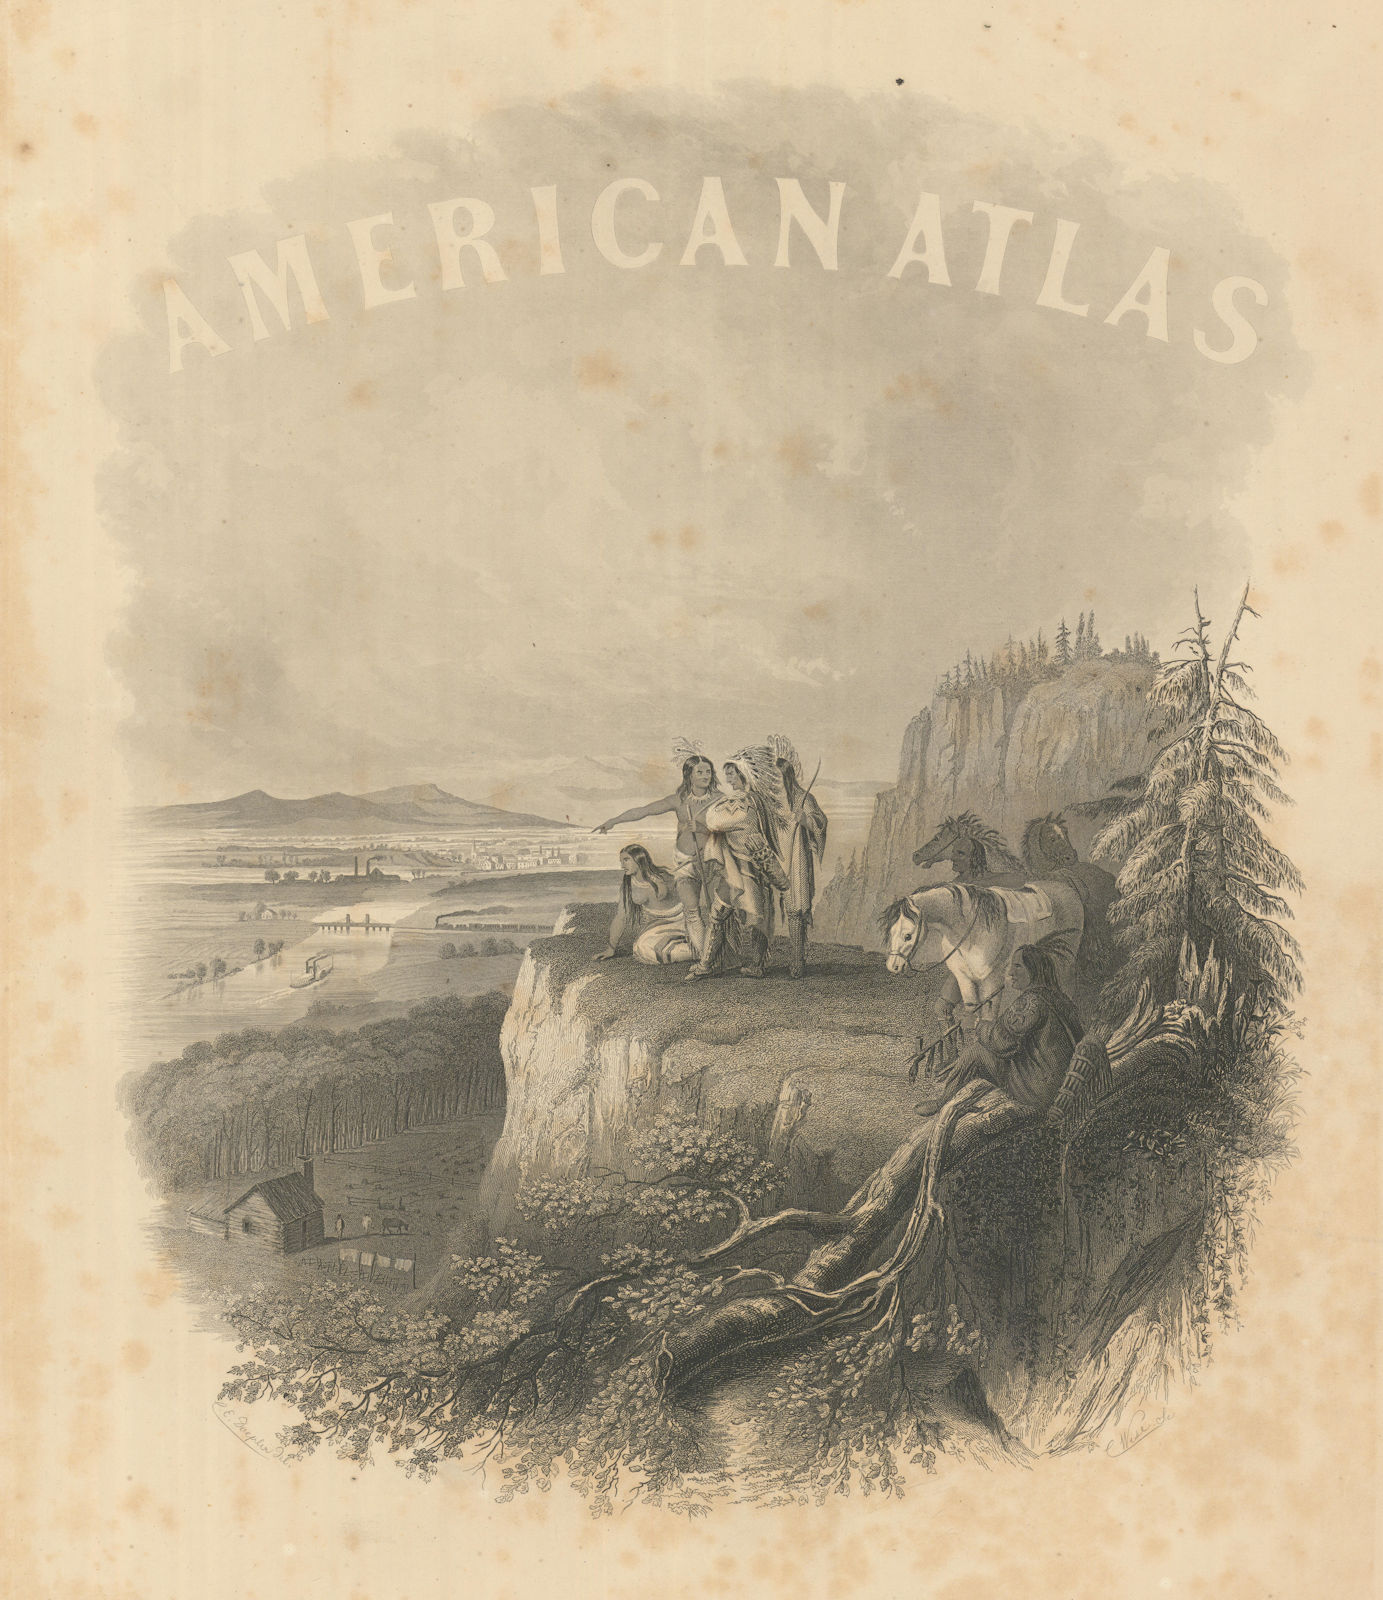 Johnson's Family Atlas title page. "American Atlas" 1866 old antique print